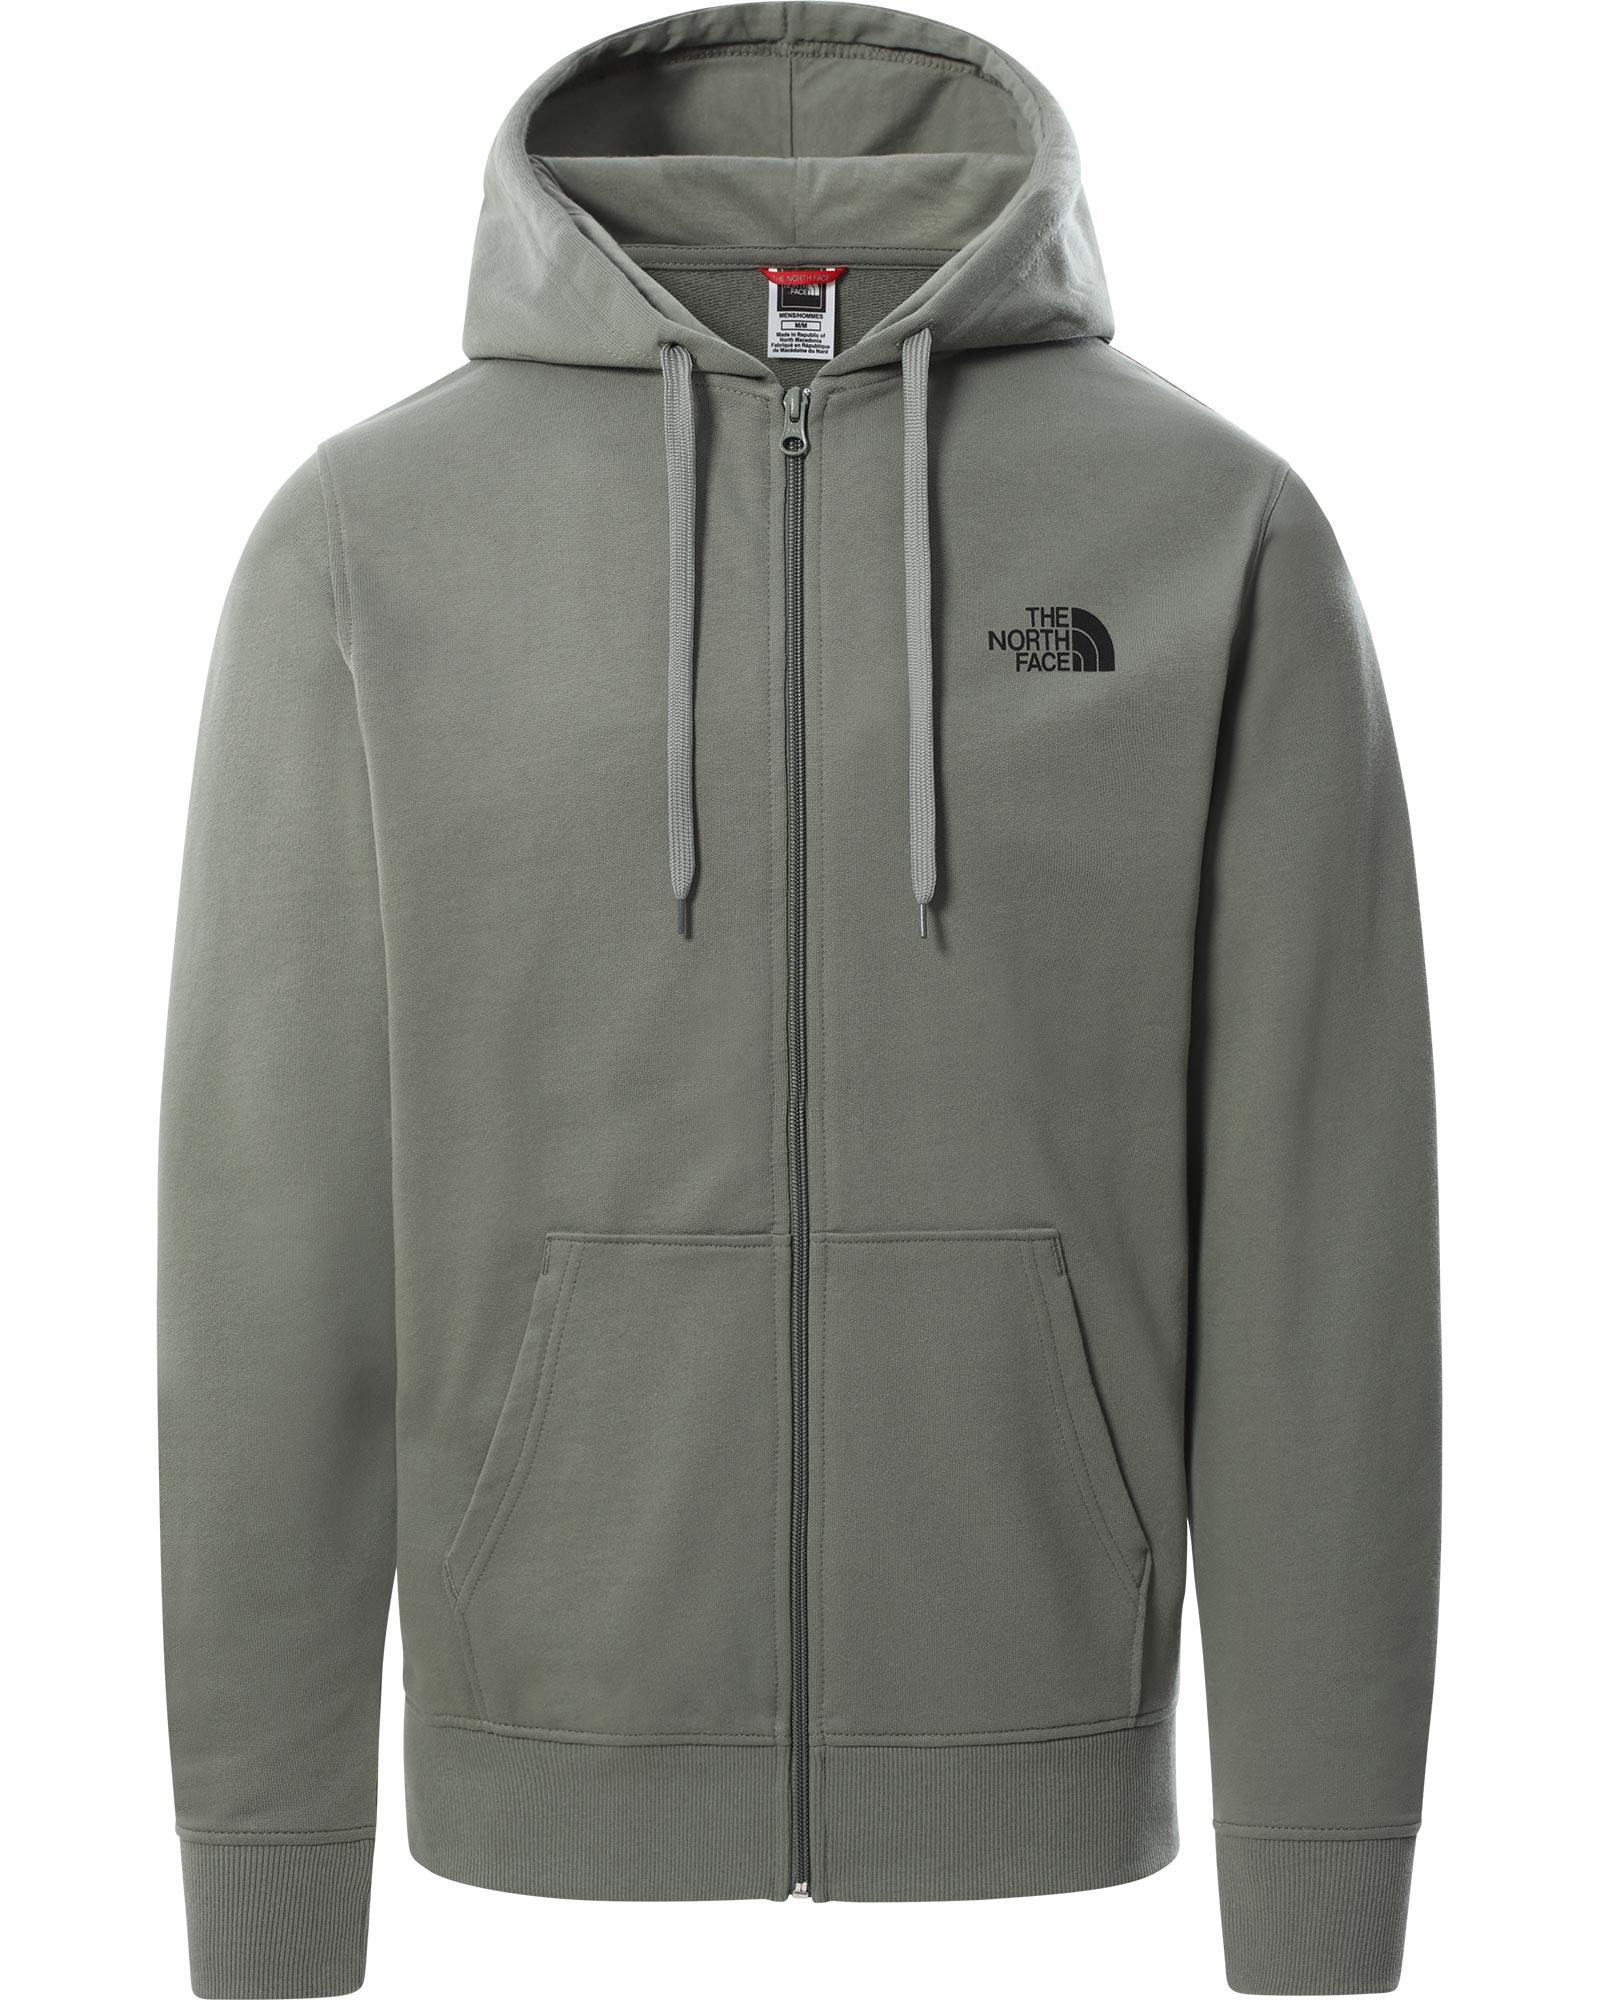 The North Face Open Gate Men’s Full Zip Hoodie - Agave Green XS